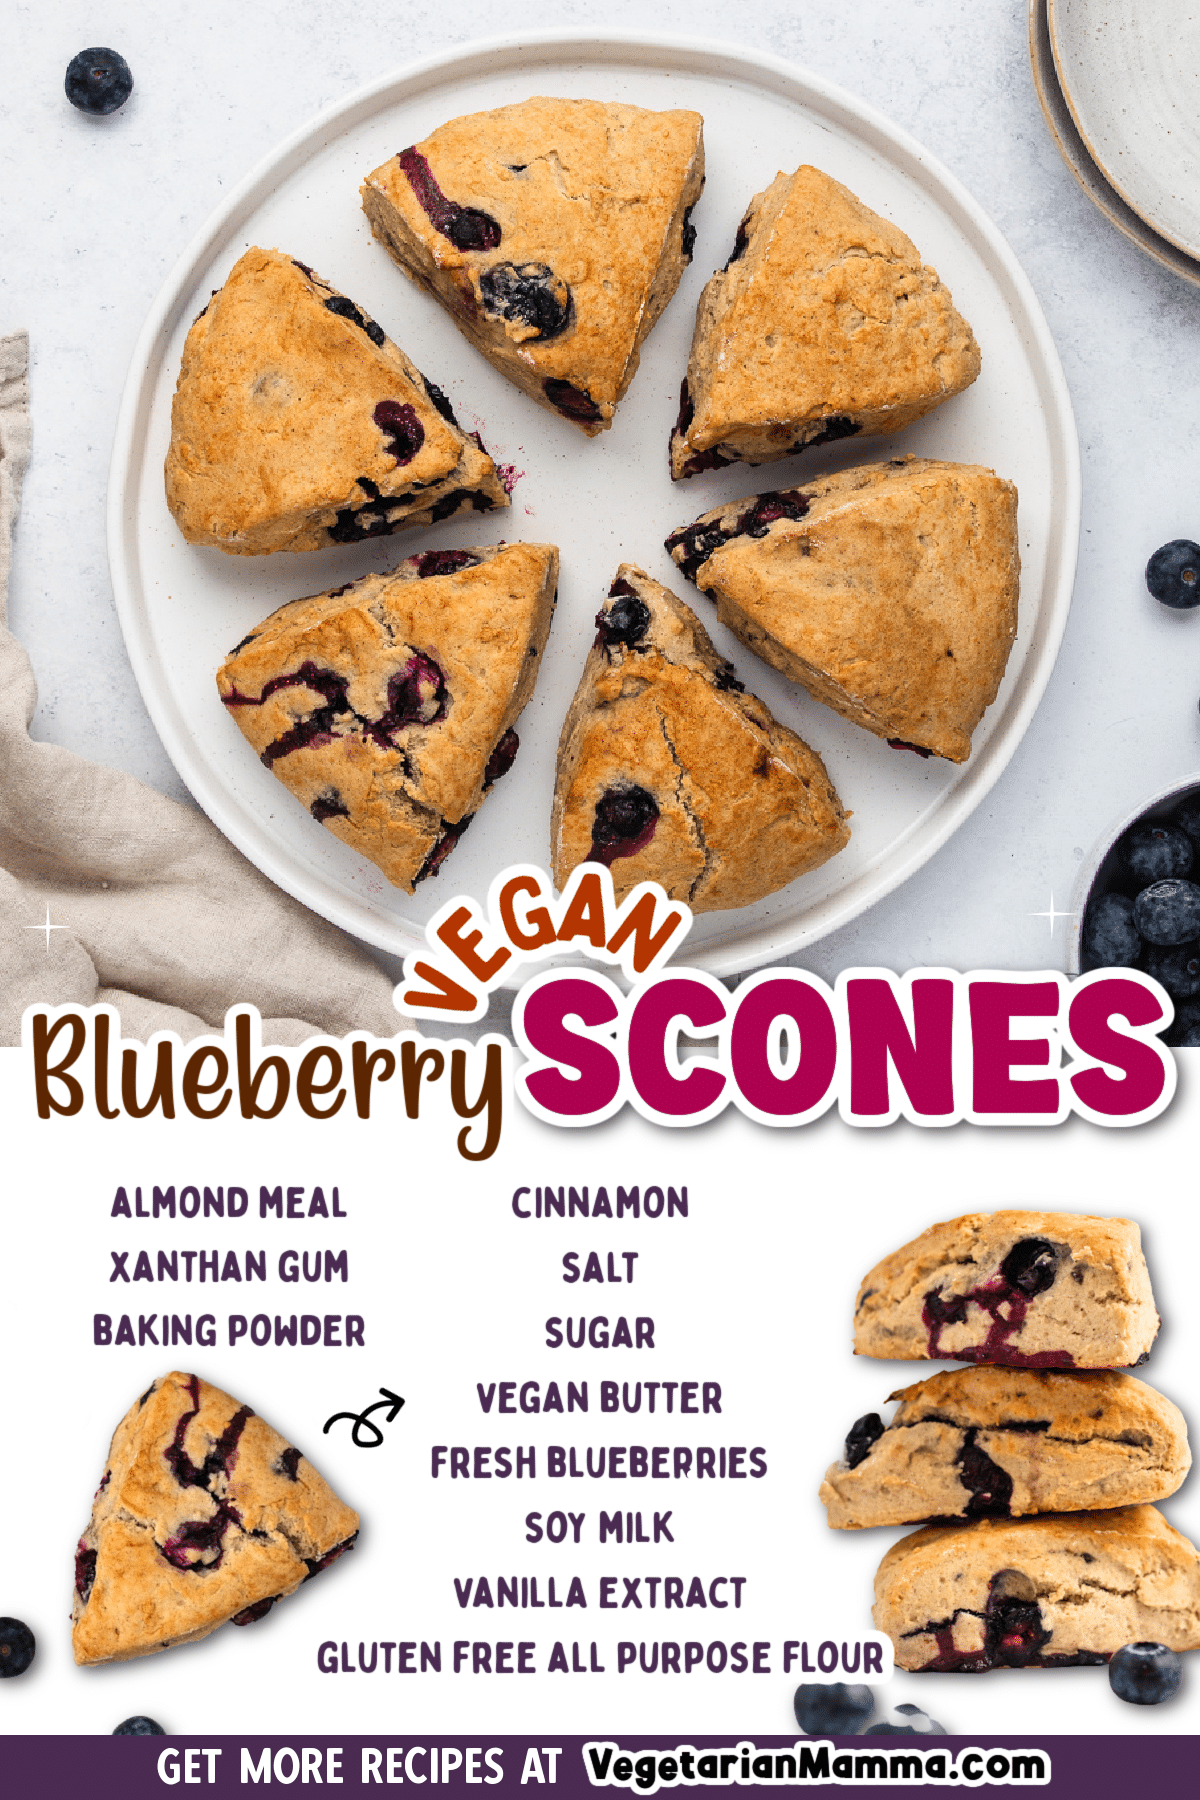 The easiest recipe for making Vegan Blueberry scones from scratch! You'll love the pops of fresh blueberries in this simple vanilla and cinnamon scone dough.